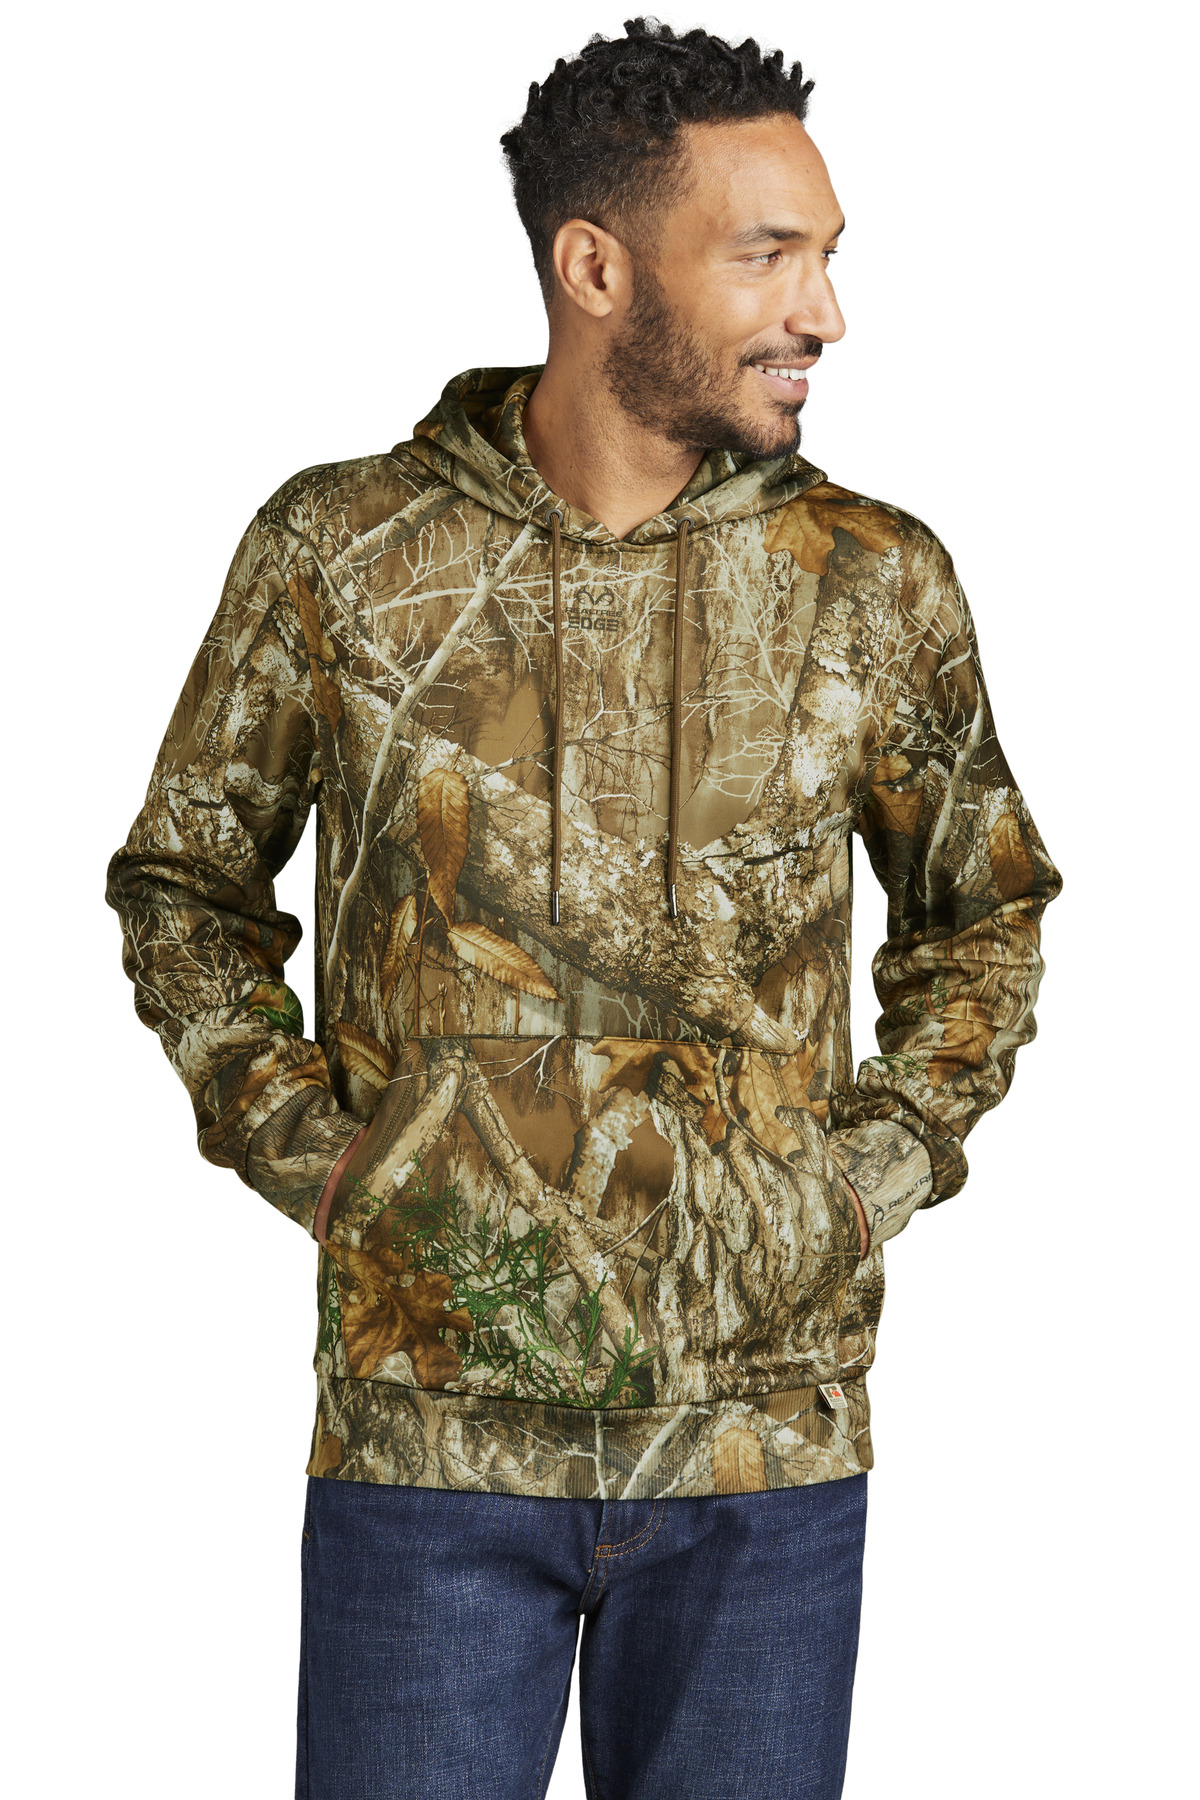 Russell Outdoors Realtree Pullover Hoodie-Russell Outdoors